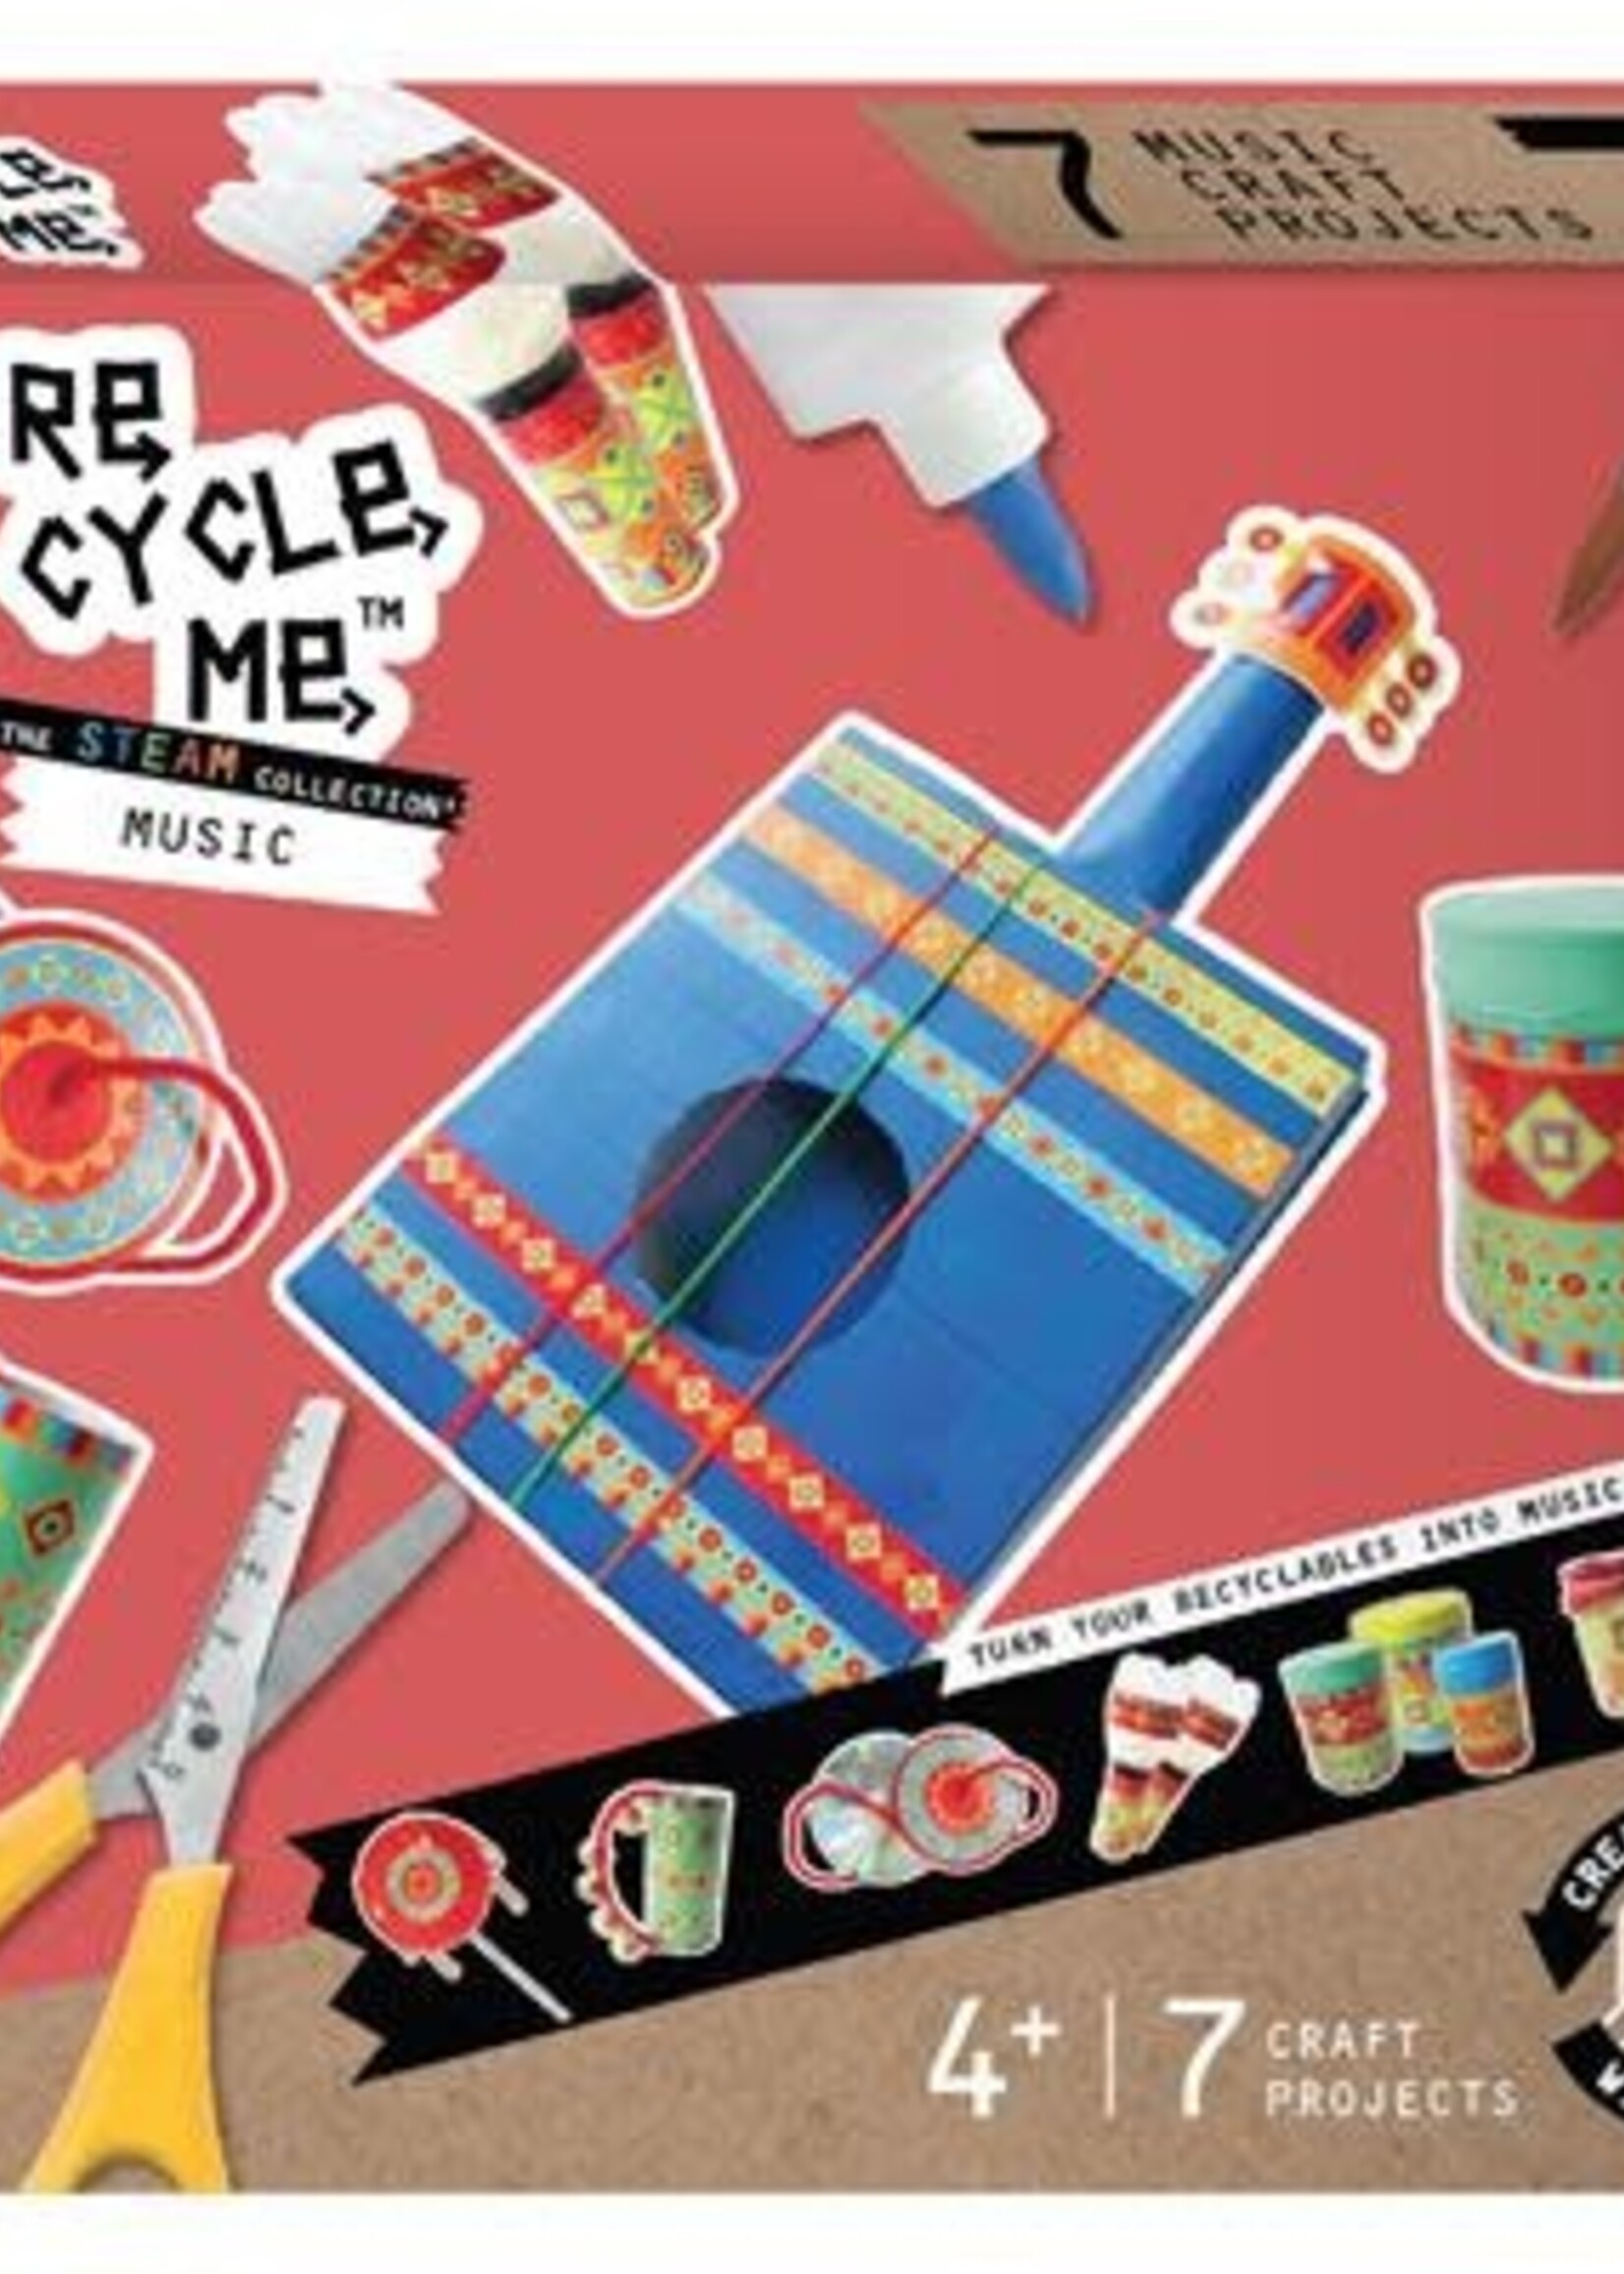 Re-cycle me Re-Cycle-Me Steam Collection Music